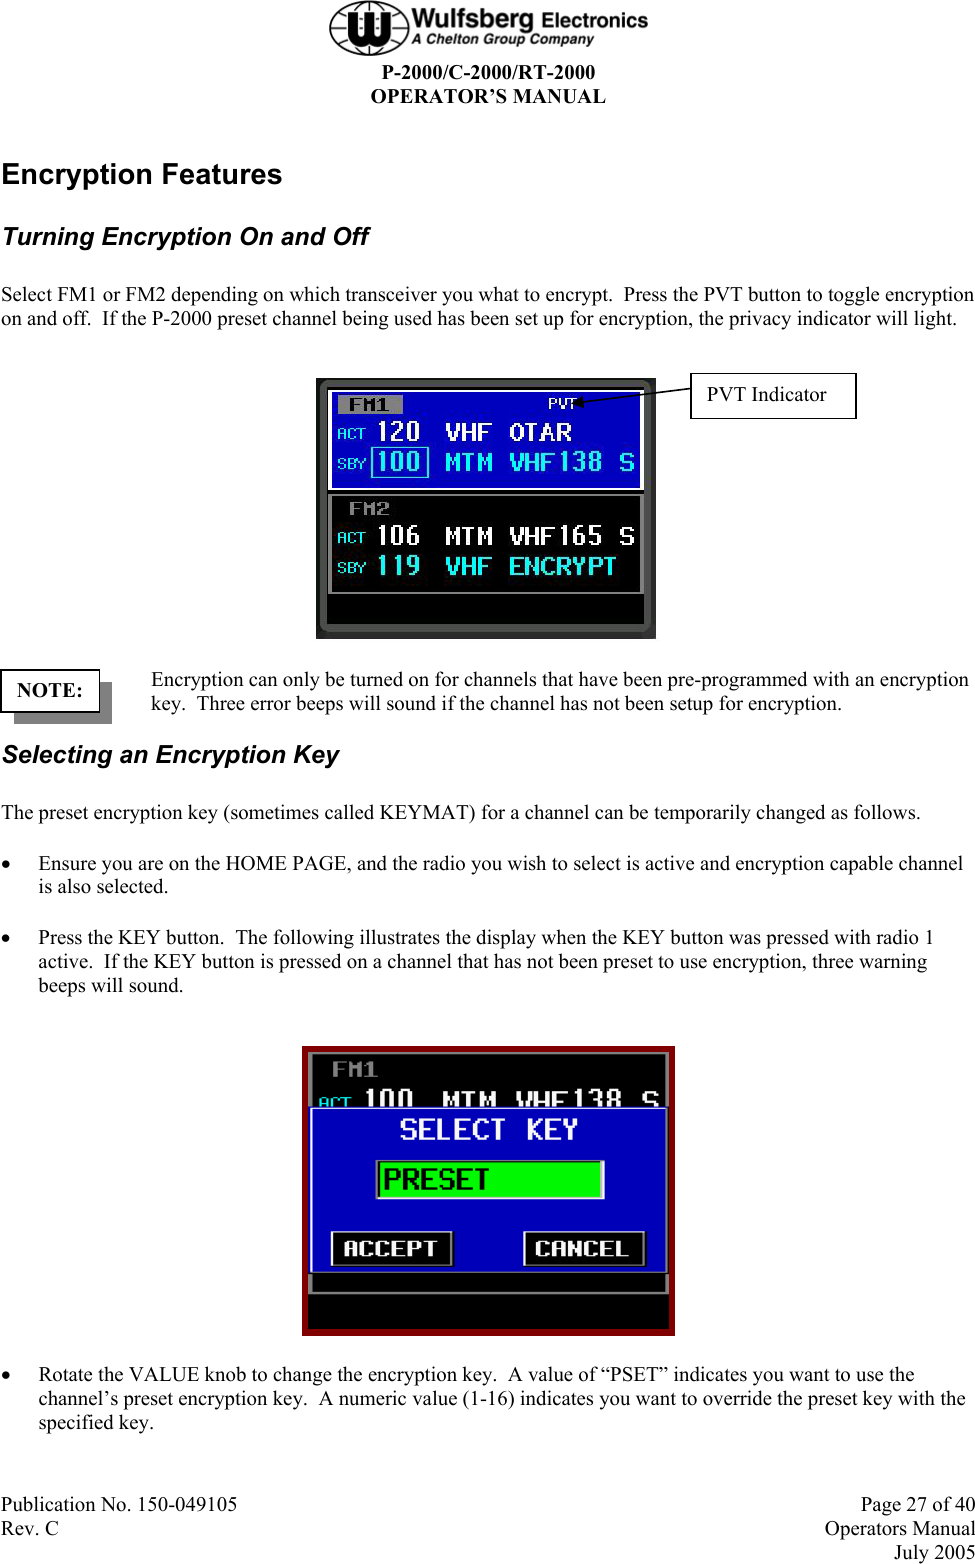  P-2000/C-2000/RT-2000 OPERATOR’S MANUAL  Publication No. 150-049105  Page 27 of 40 Rev. C  Operators Manual  July 2005 Encryption Features Turning Encryption On and Off Select FM1 or FM2 depending on which transceiver you what to encrypt.  Press the PVT button to toggle encryption on and off.  If the P-2000 preset channel being used has been set up for encryption, the privacy indicator will light.   Encryption can only be turned on for channels that have been pre-programmed with an encryption key.  Three error beeps will sound if the channel has not been setup for encryption. Selecting an Encryption Key The preset encryption key (sometimes called KEYMAT) for a channel can be temporarily changed as follows. • Ensure you are on the HOME PAGE, and the radio you wish to select is active and encryption capable channel is also selected. • Press the KEY button.  The following illustrates the display when the KEY button was pressed with radio 1 active.  If the KEY button is pressed on a channel that has not been preset to use encryption, three warning beeps will sound.   • Rotate the VALUE knob to change the encryption key.  A value of “PSET” indicates you want to use the channel’s preset encryption key.  A numeric value (1-16) indicates you want to override the preset key with the specified key. NOTE: PVT Indicator 